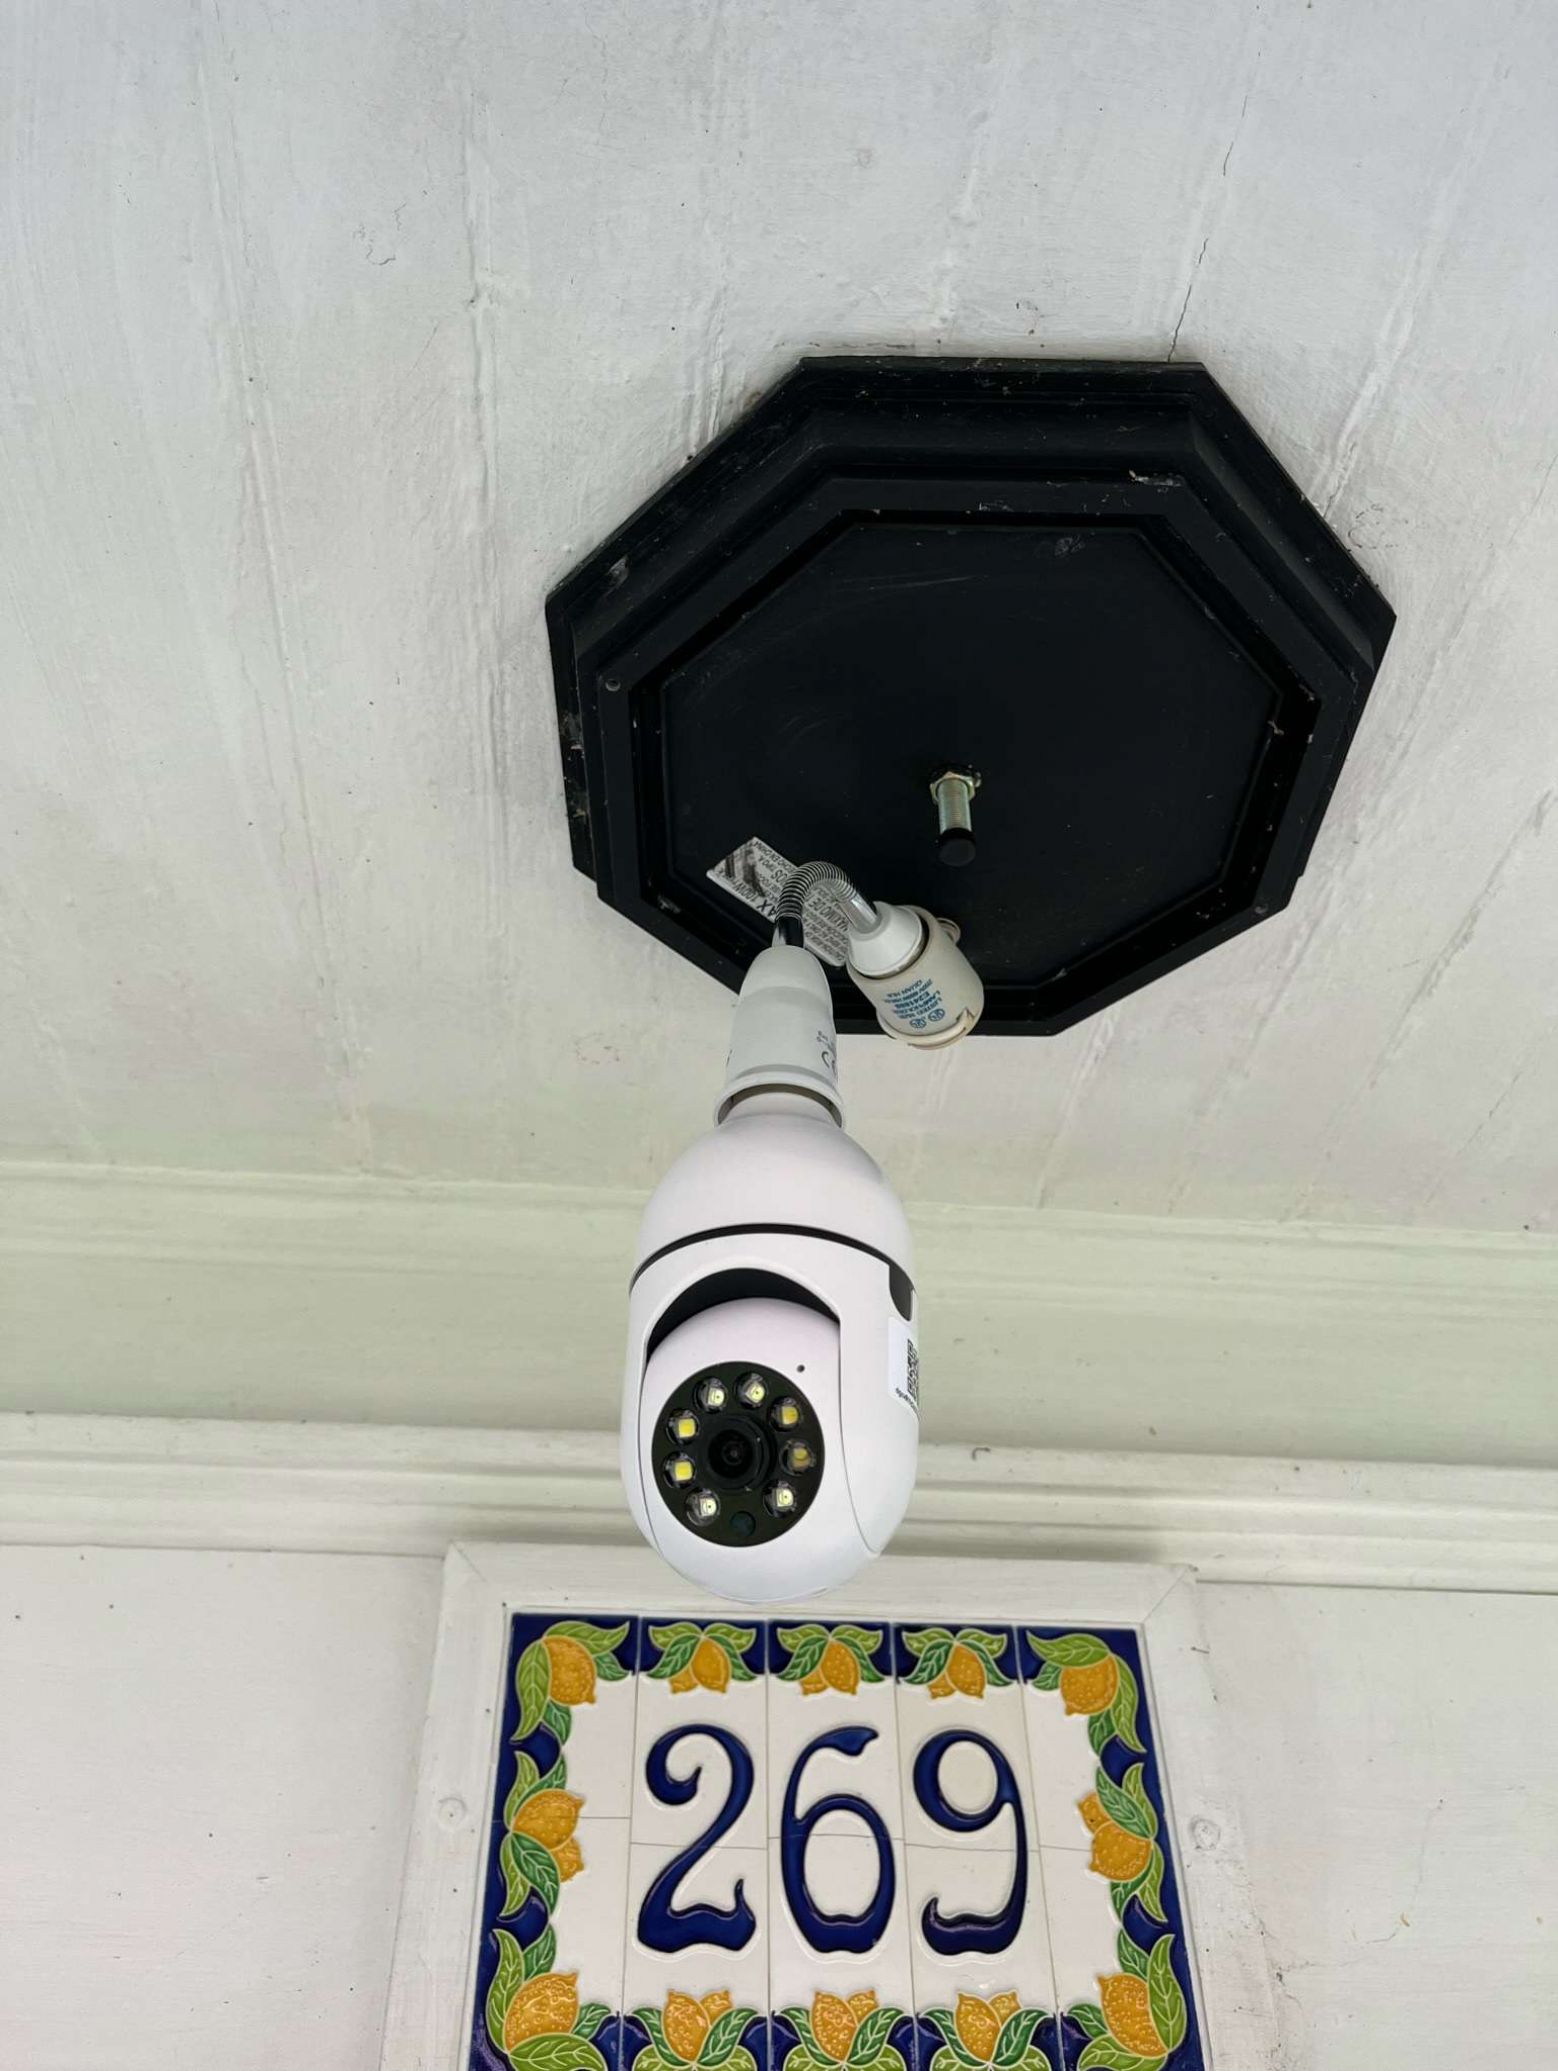 The Nomad Security Camera